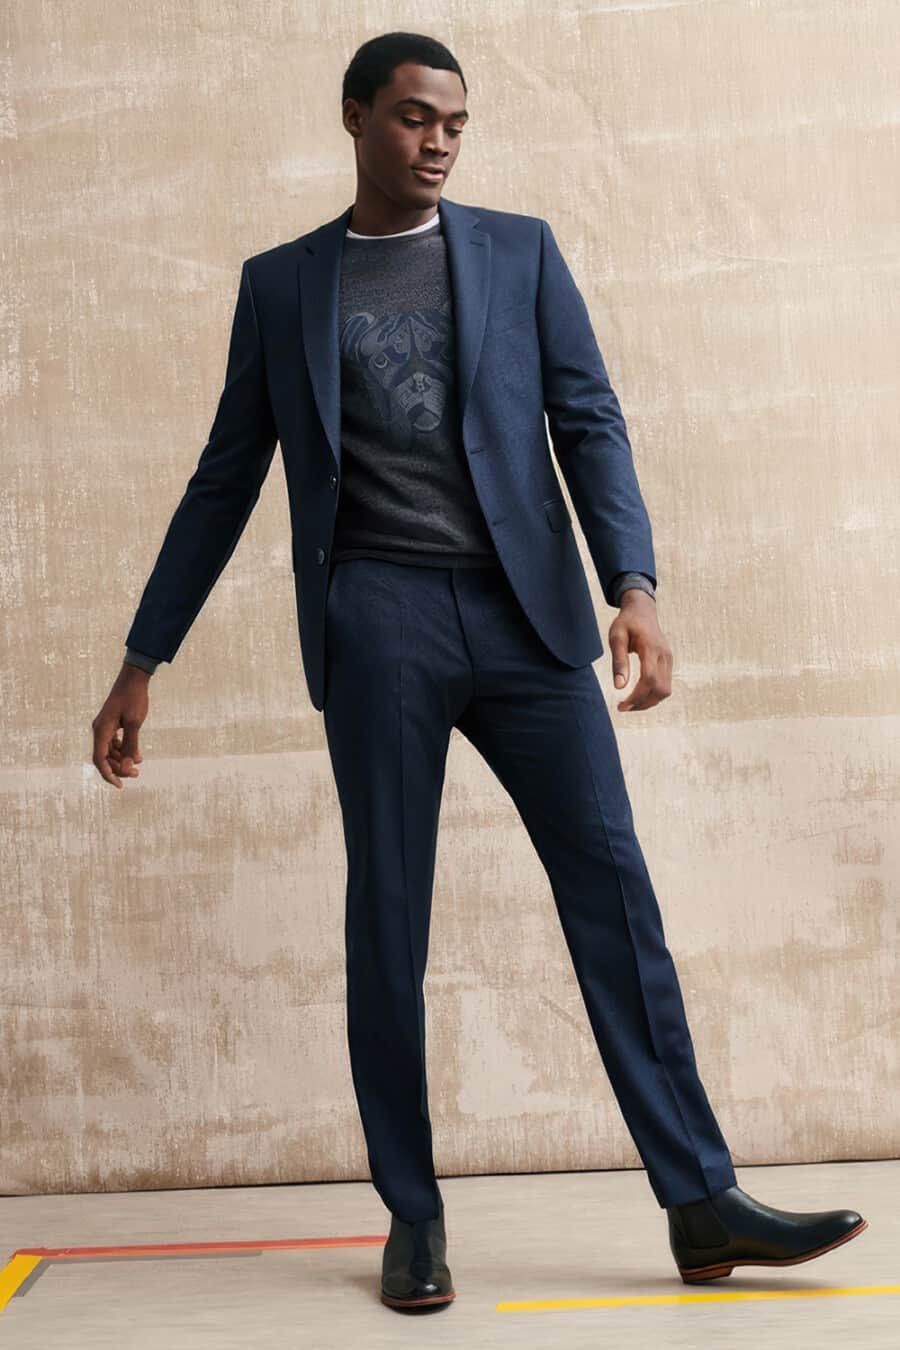 Men's blue suit, printed grey sweatshirt and black leather Chelsea boots outfit